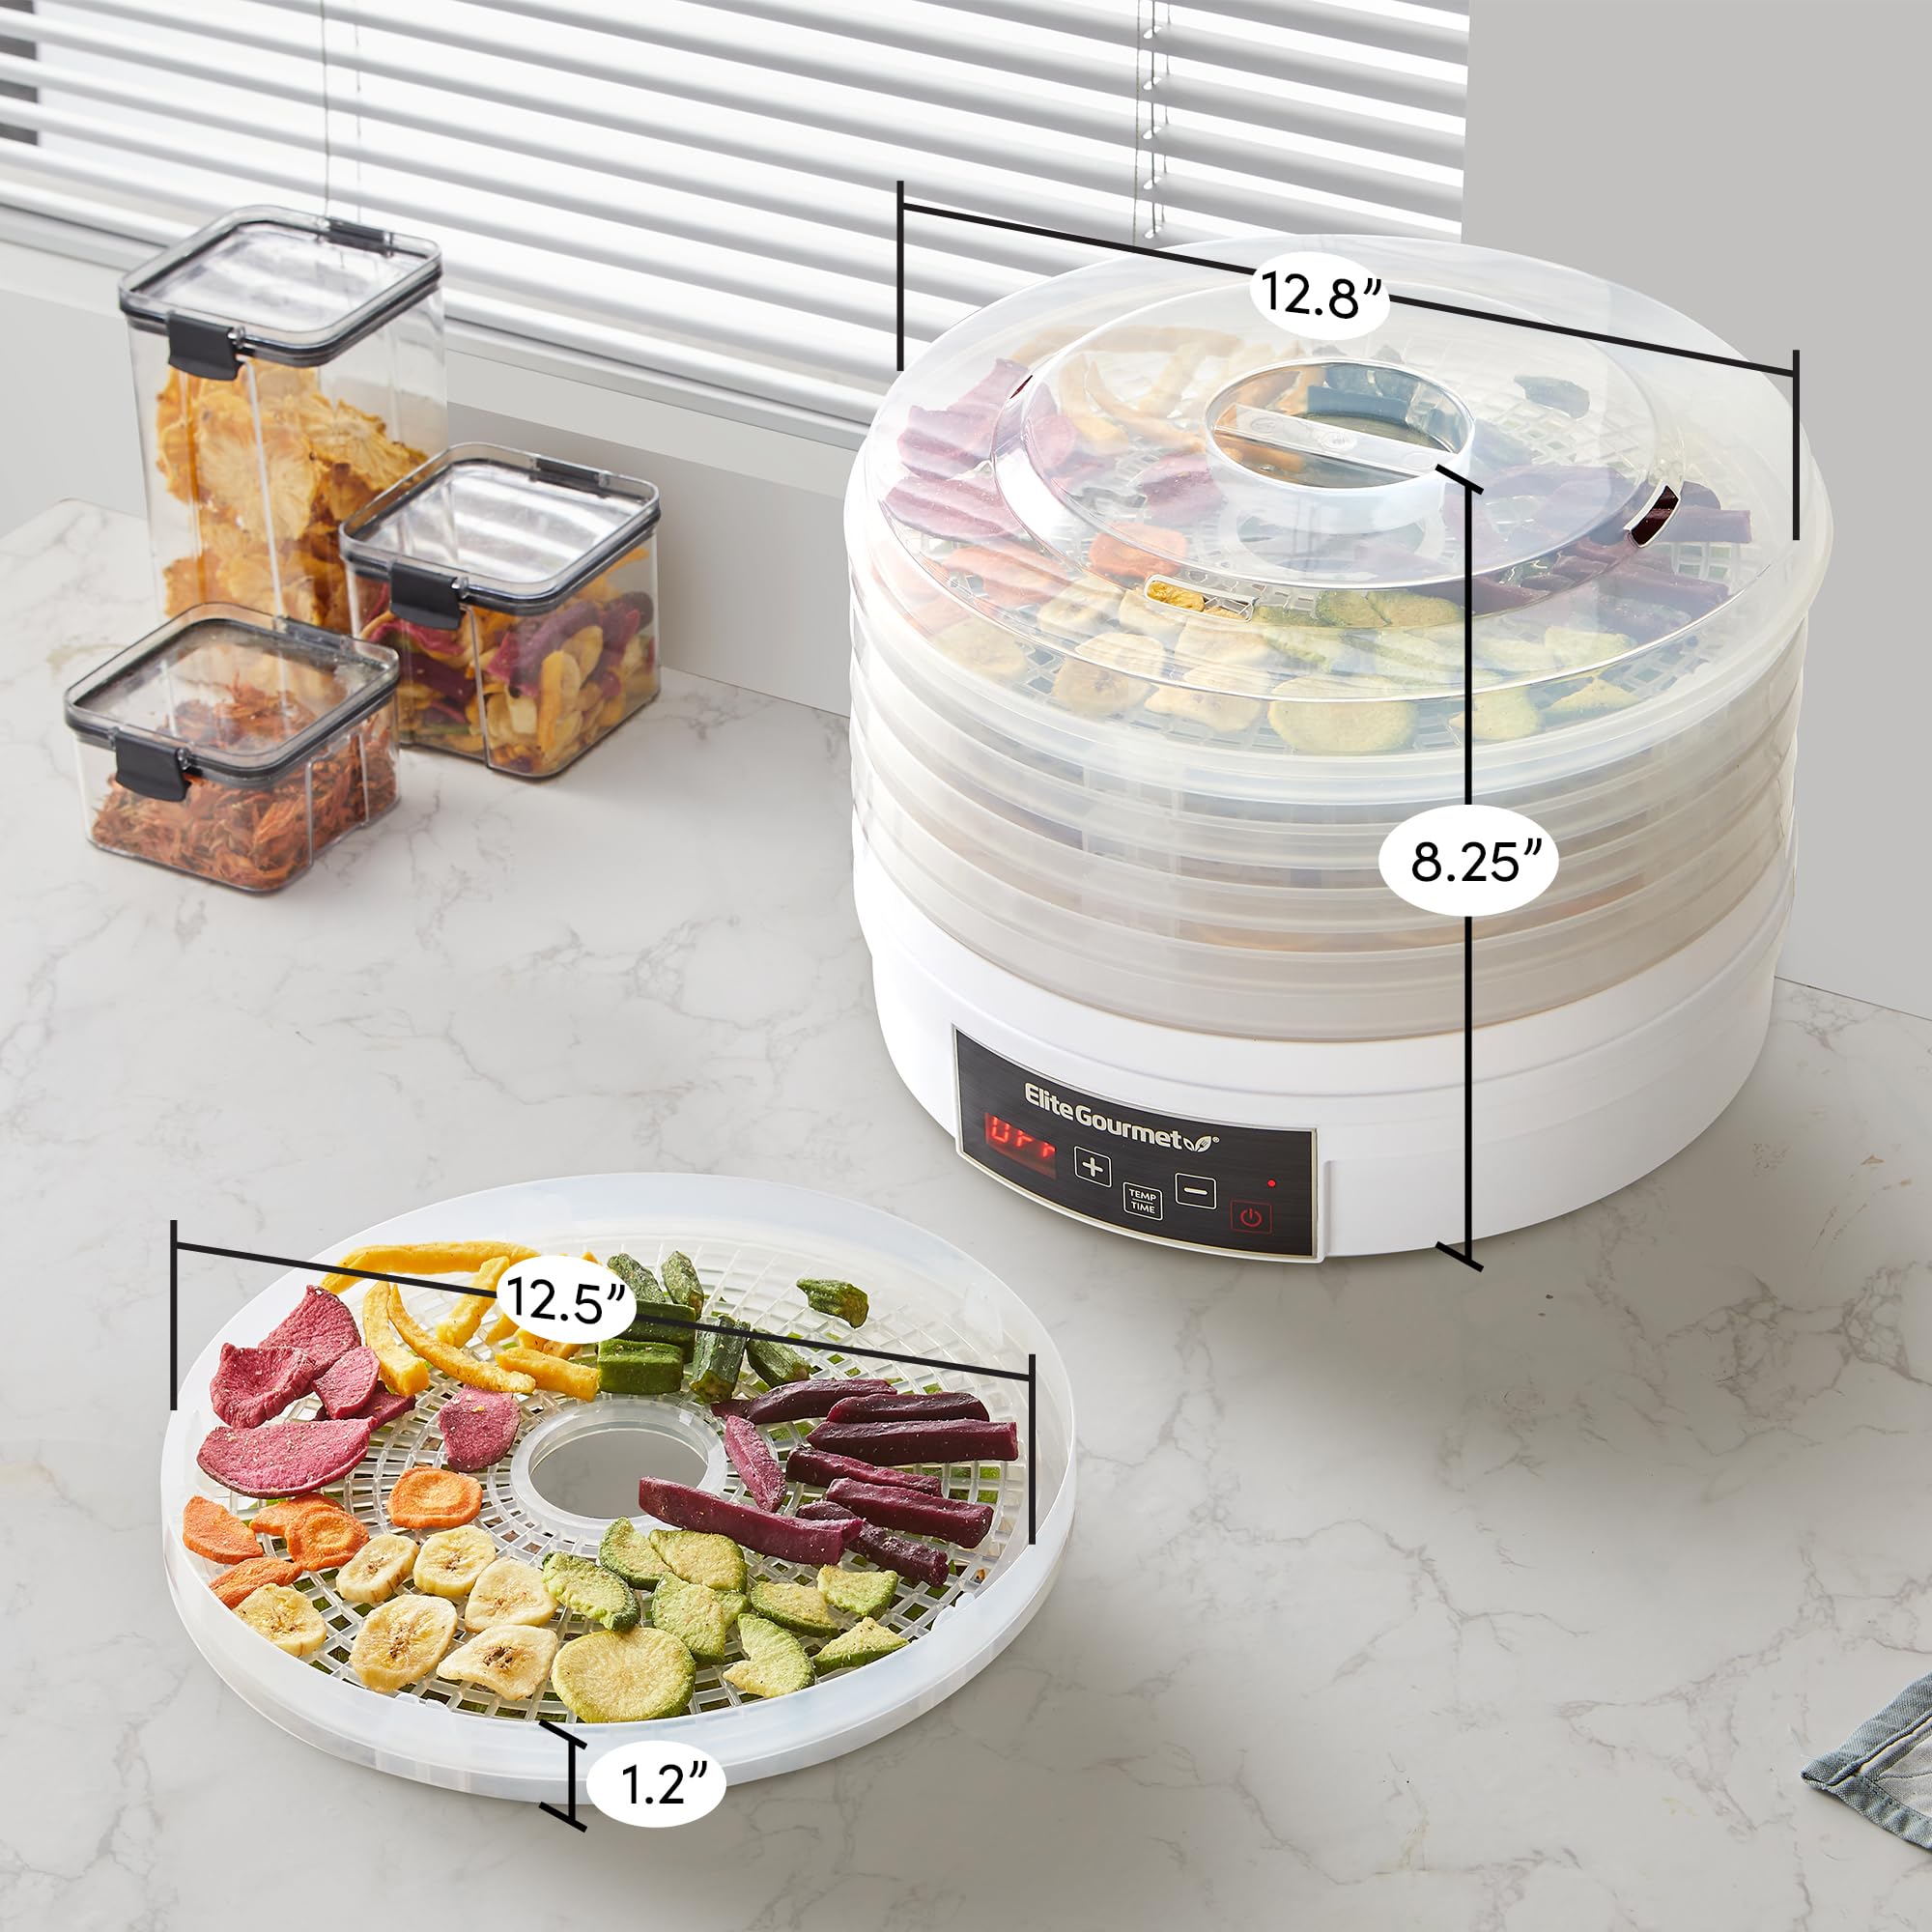 Elite Gourmet EFD770WD Digital Food Dehydrator with 5x12.5” BPA Free Trays, Adjustable Time and Temperature Controls, Jerky, Herbs, Fruit, Veggies, Snacks, White